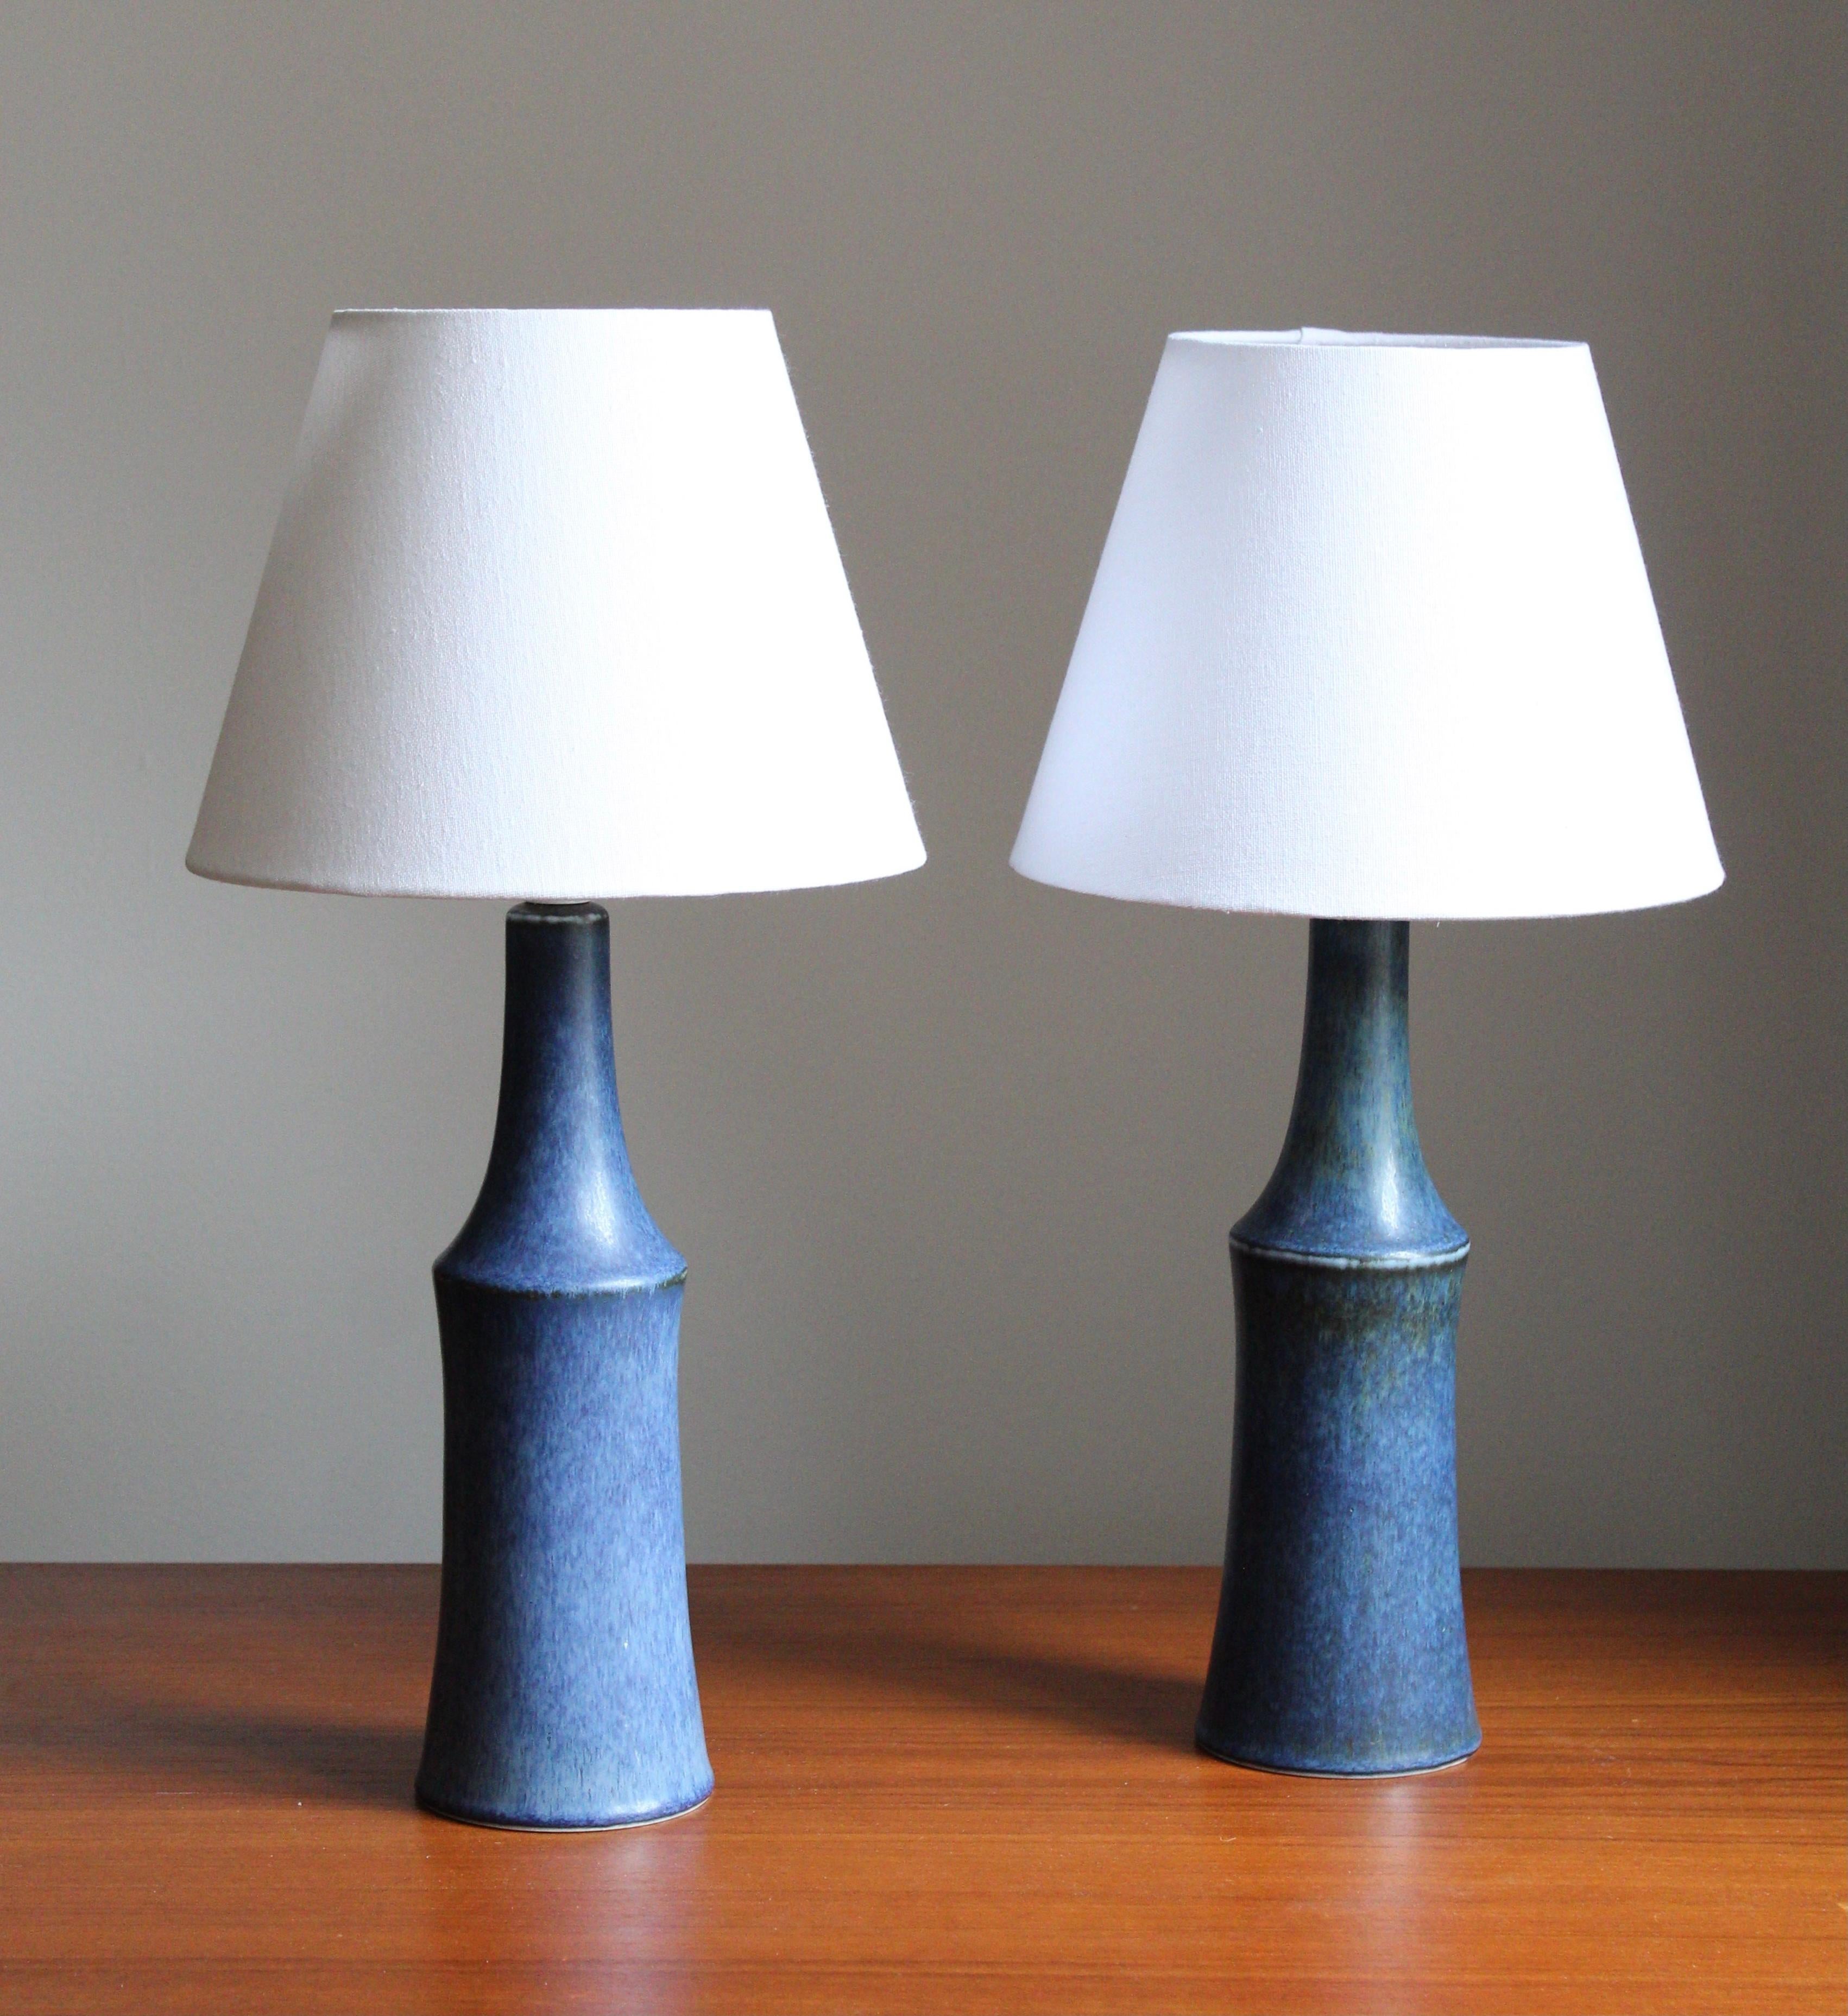 A pair of rare table lamps by Carl-Harry Stålhane for the iconic Swedish firm Rörstrand. Features highly artistic blue glaze. Sold without lampshades.


Other ceramicists of the period include Berndt Friberg, Axel Salto, and Wilhelm Kåge, Lucie Rie,